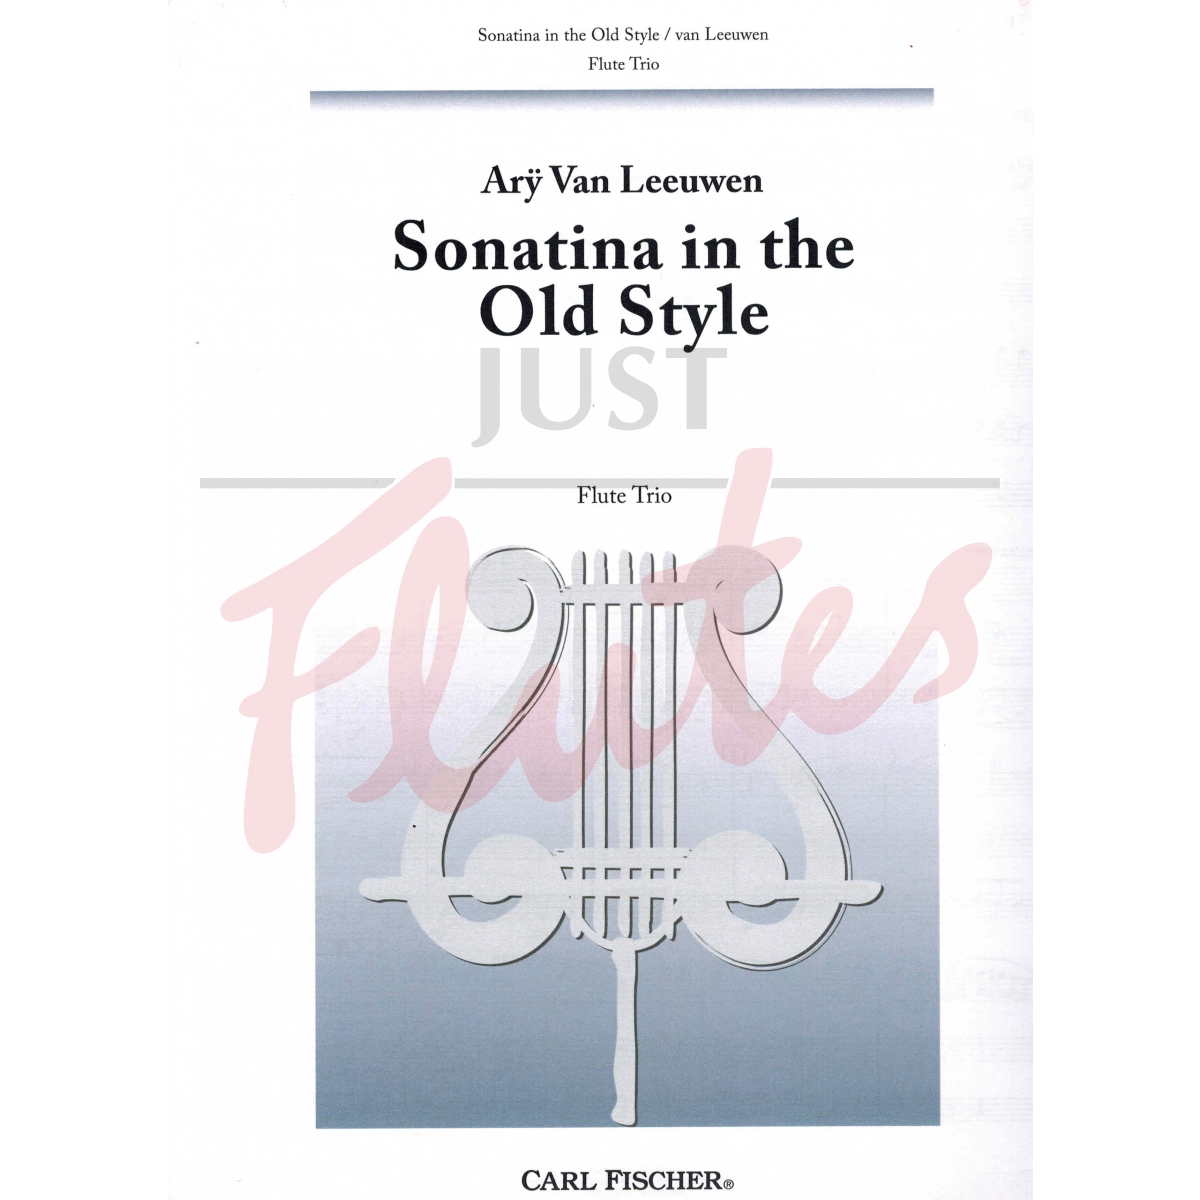 Sonatina in the Old Style for Flute Trio